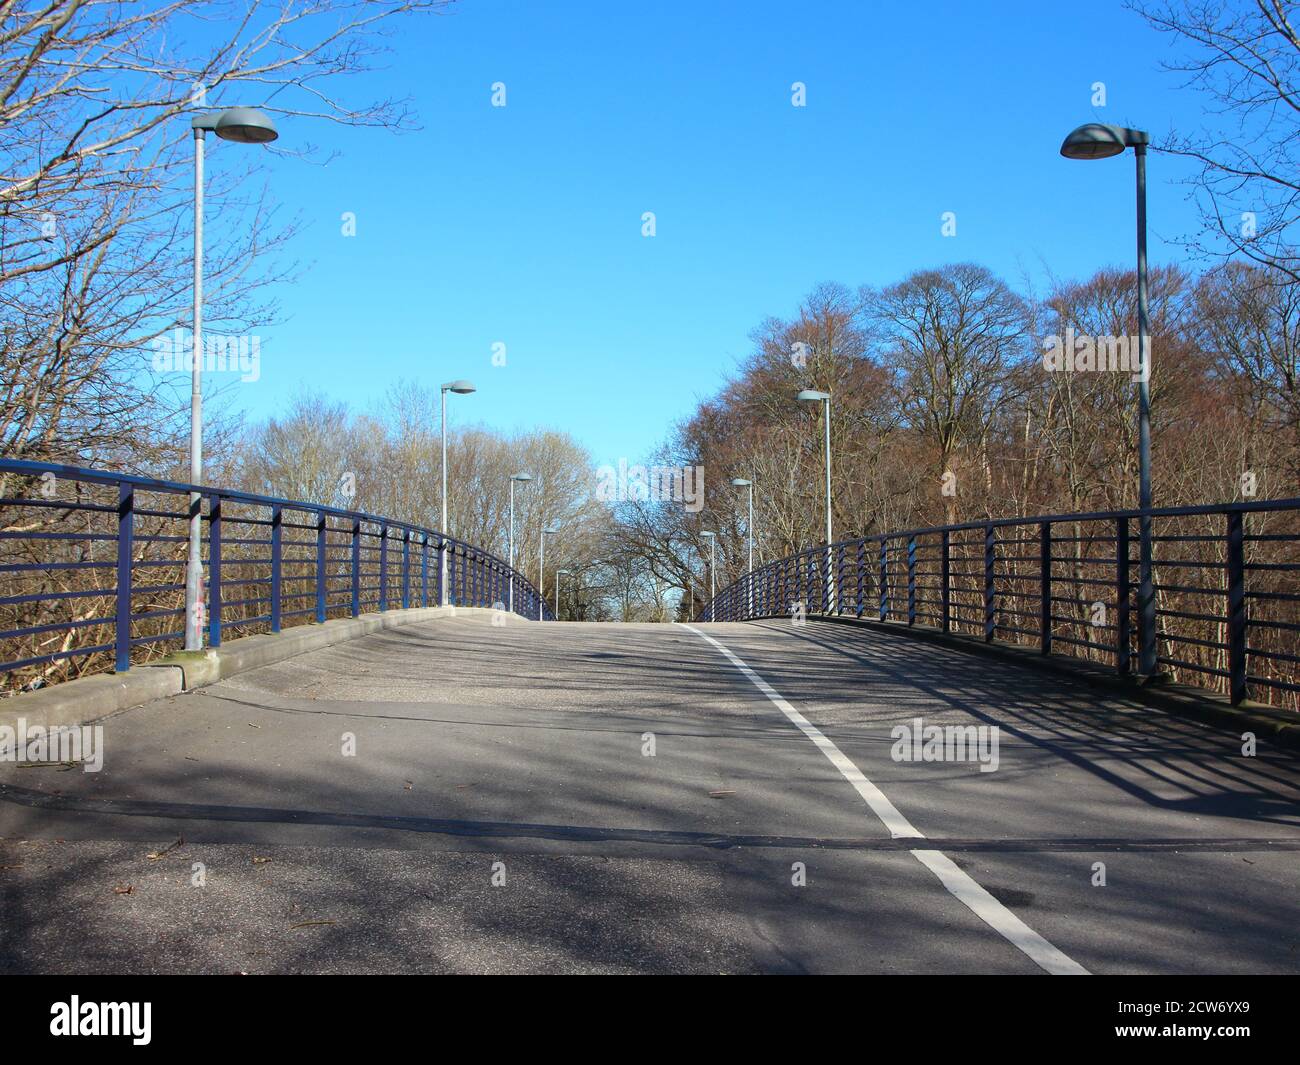 An empty curved pedestrian and bicycle crossing road. It is a bridge with lampposts on either side. Stock Photo